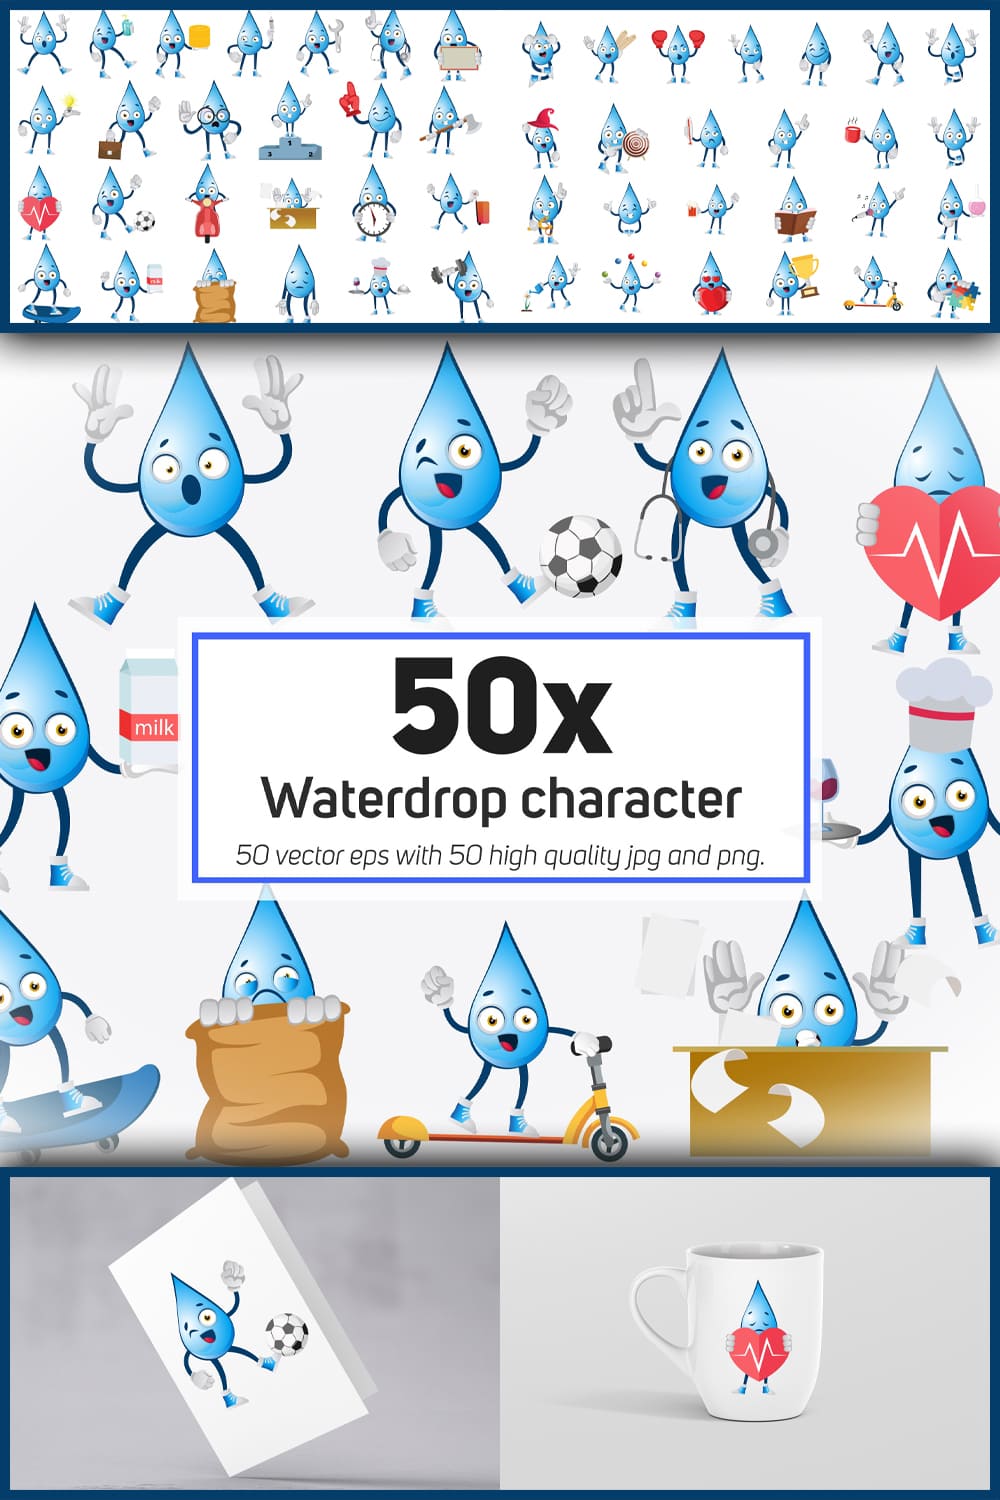 542330 50x waterdrop character and mascot collection illu pinterest 1000 1500 903